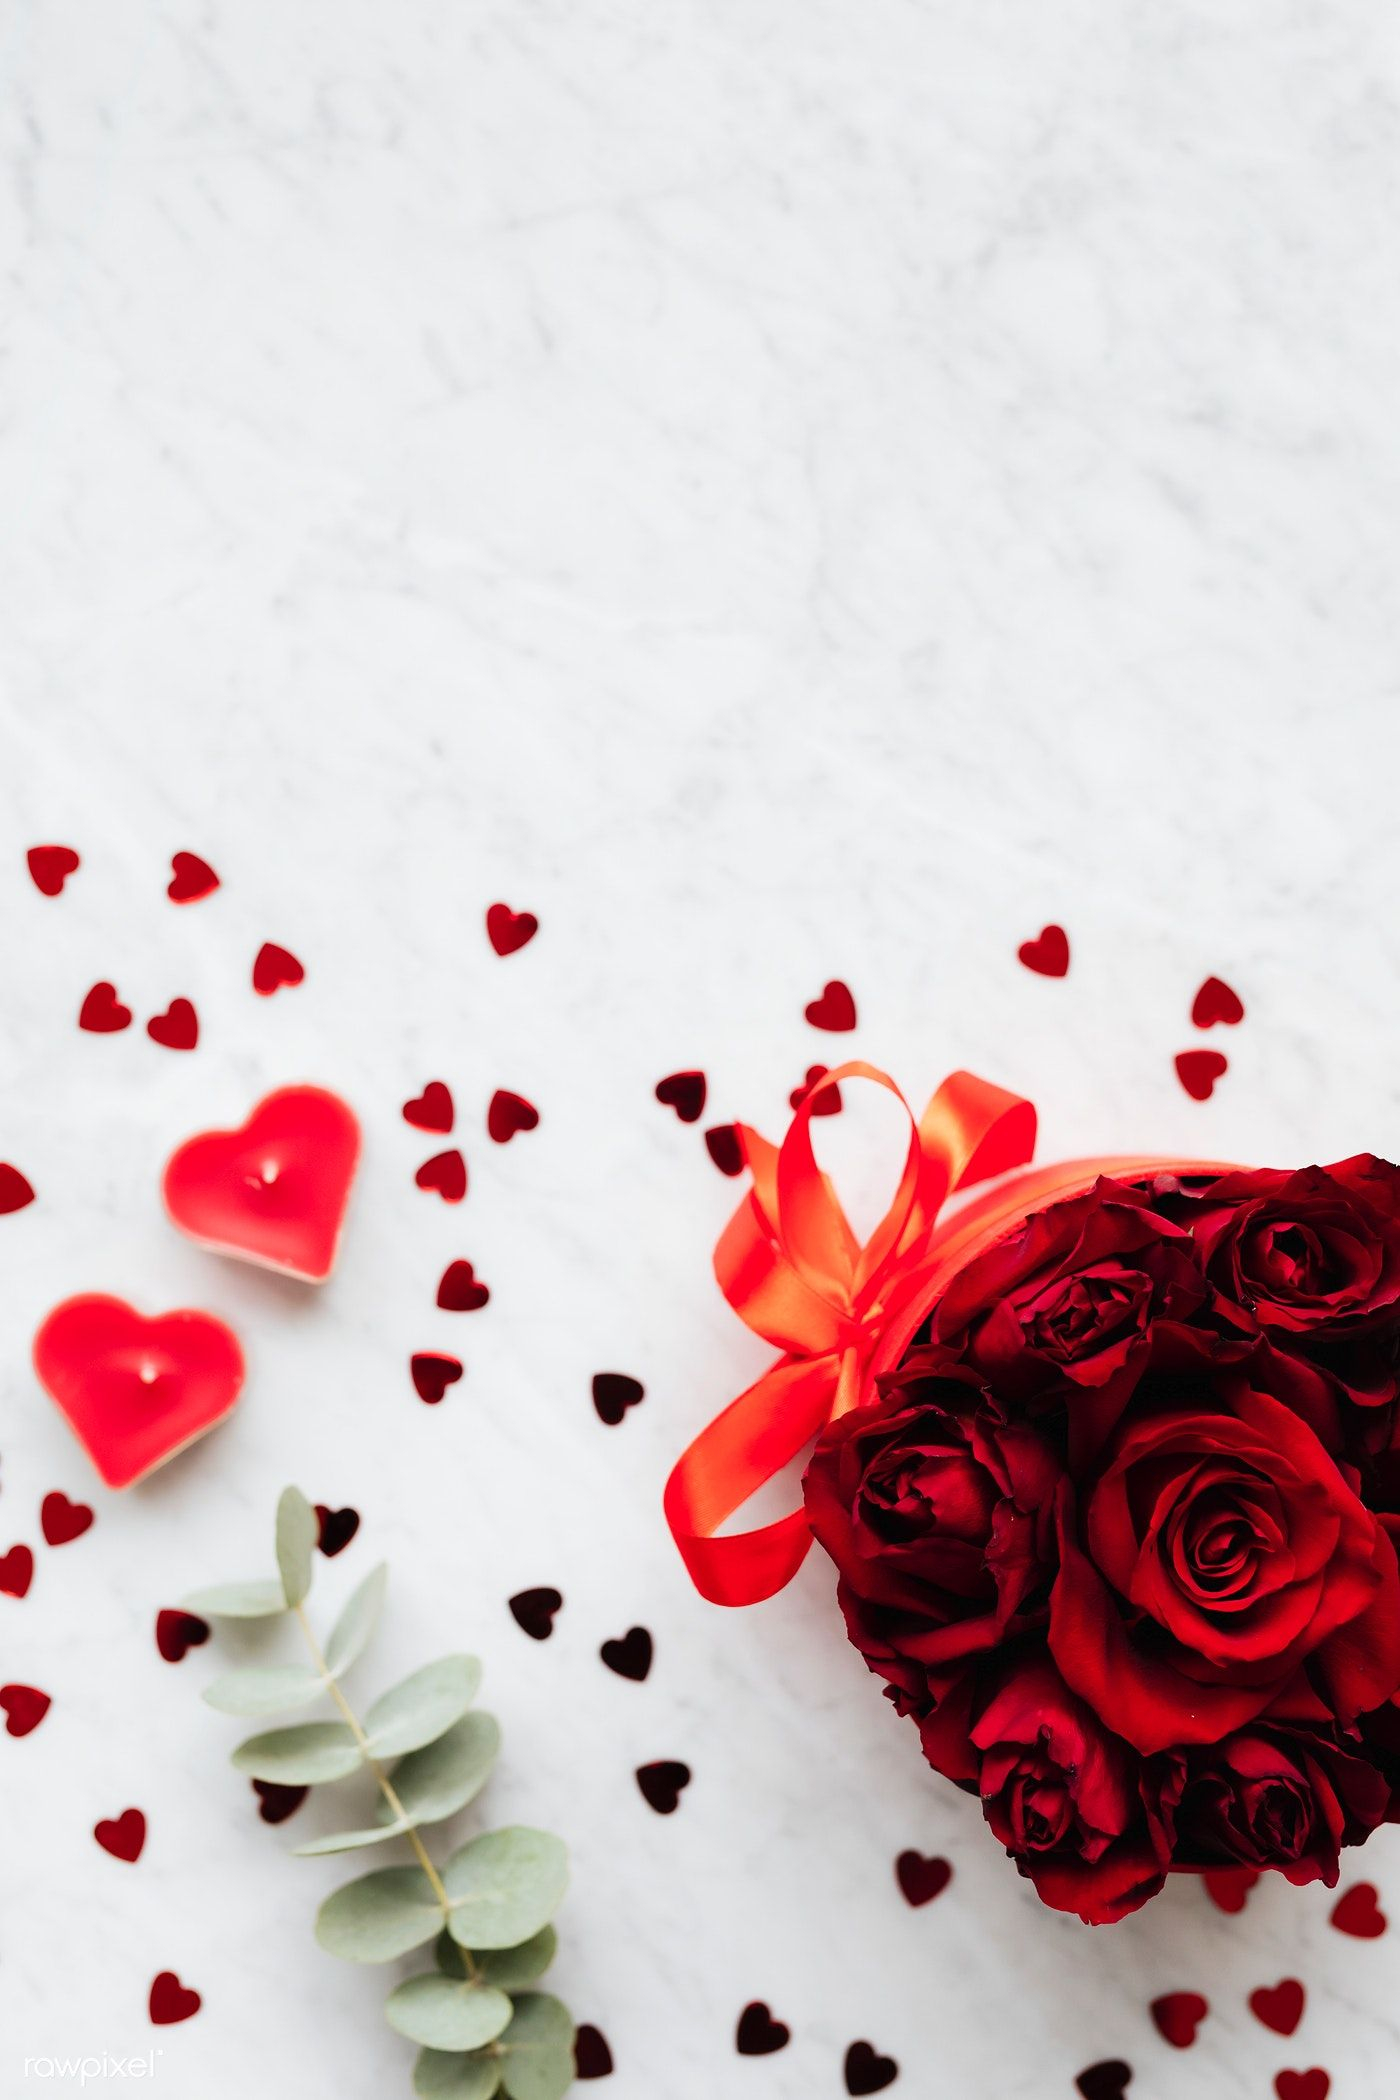 1400x2100 Box of red roses and heart decorations | free image by / Karolina / Kaboompics | Red roses background, Heart decorations, Red roses